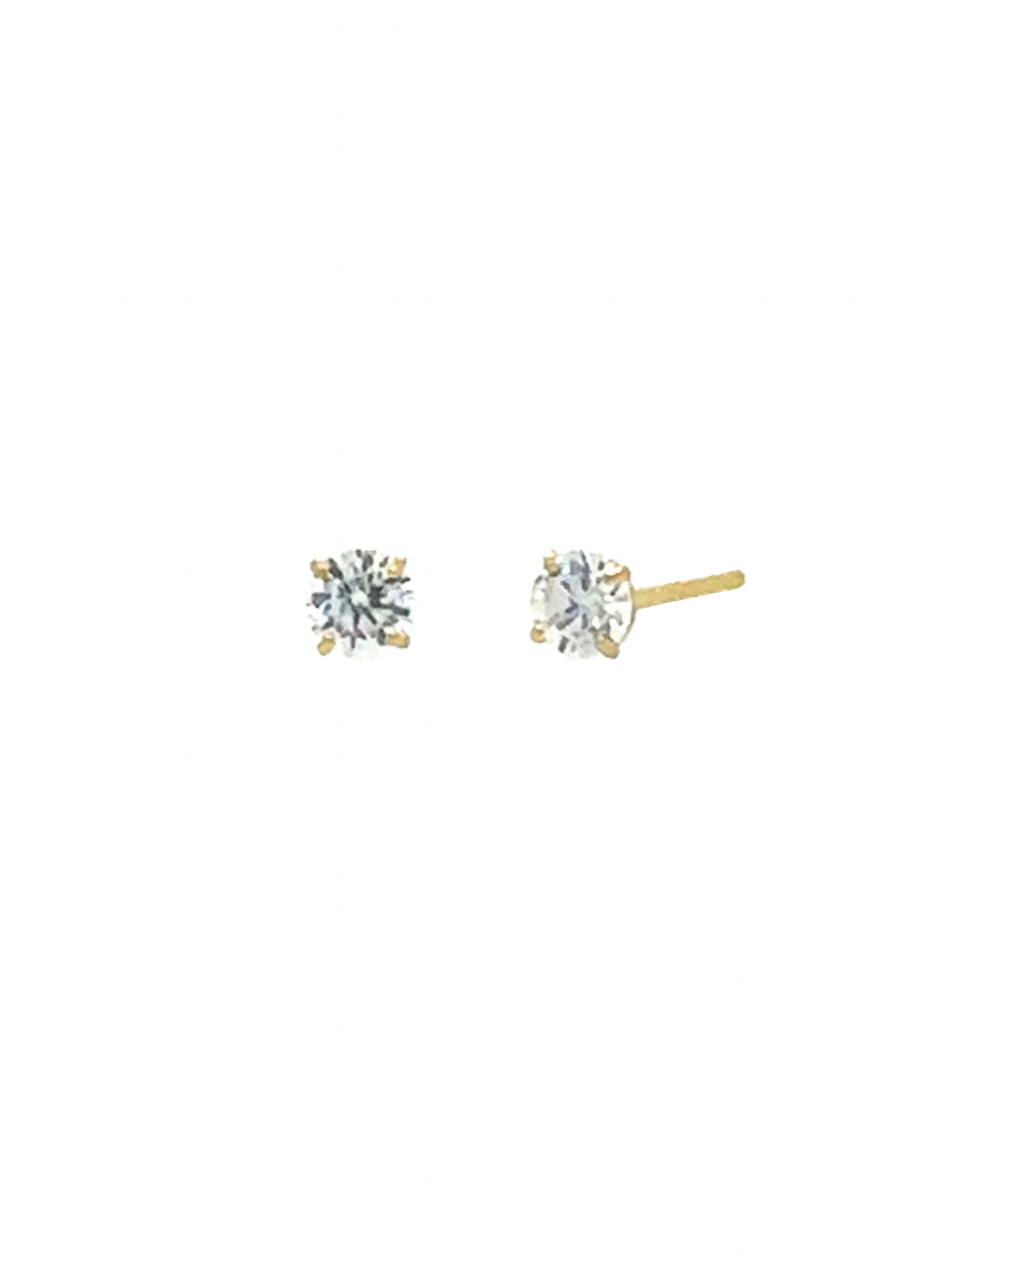 14k yellow solid gold cubic zirconia crystal stud earrings with butterfly backings 